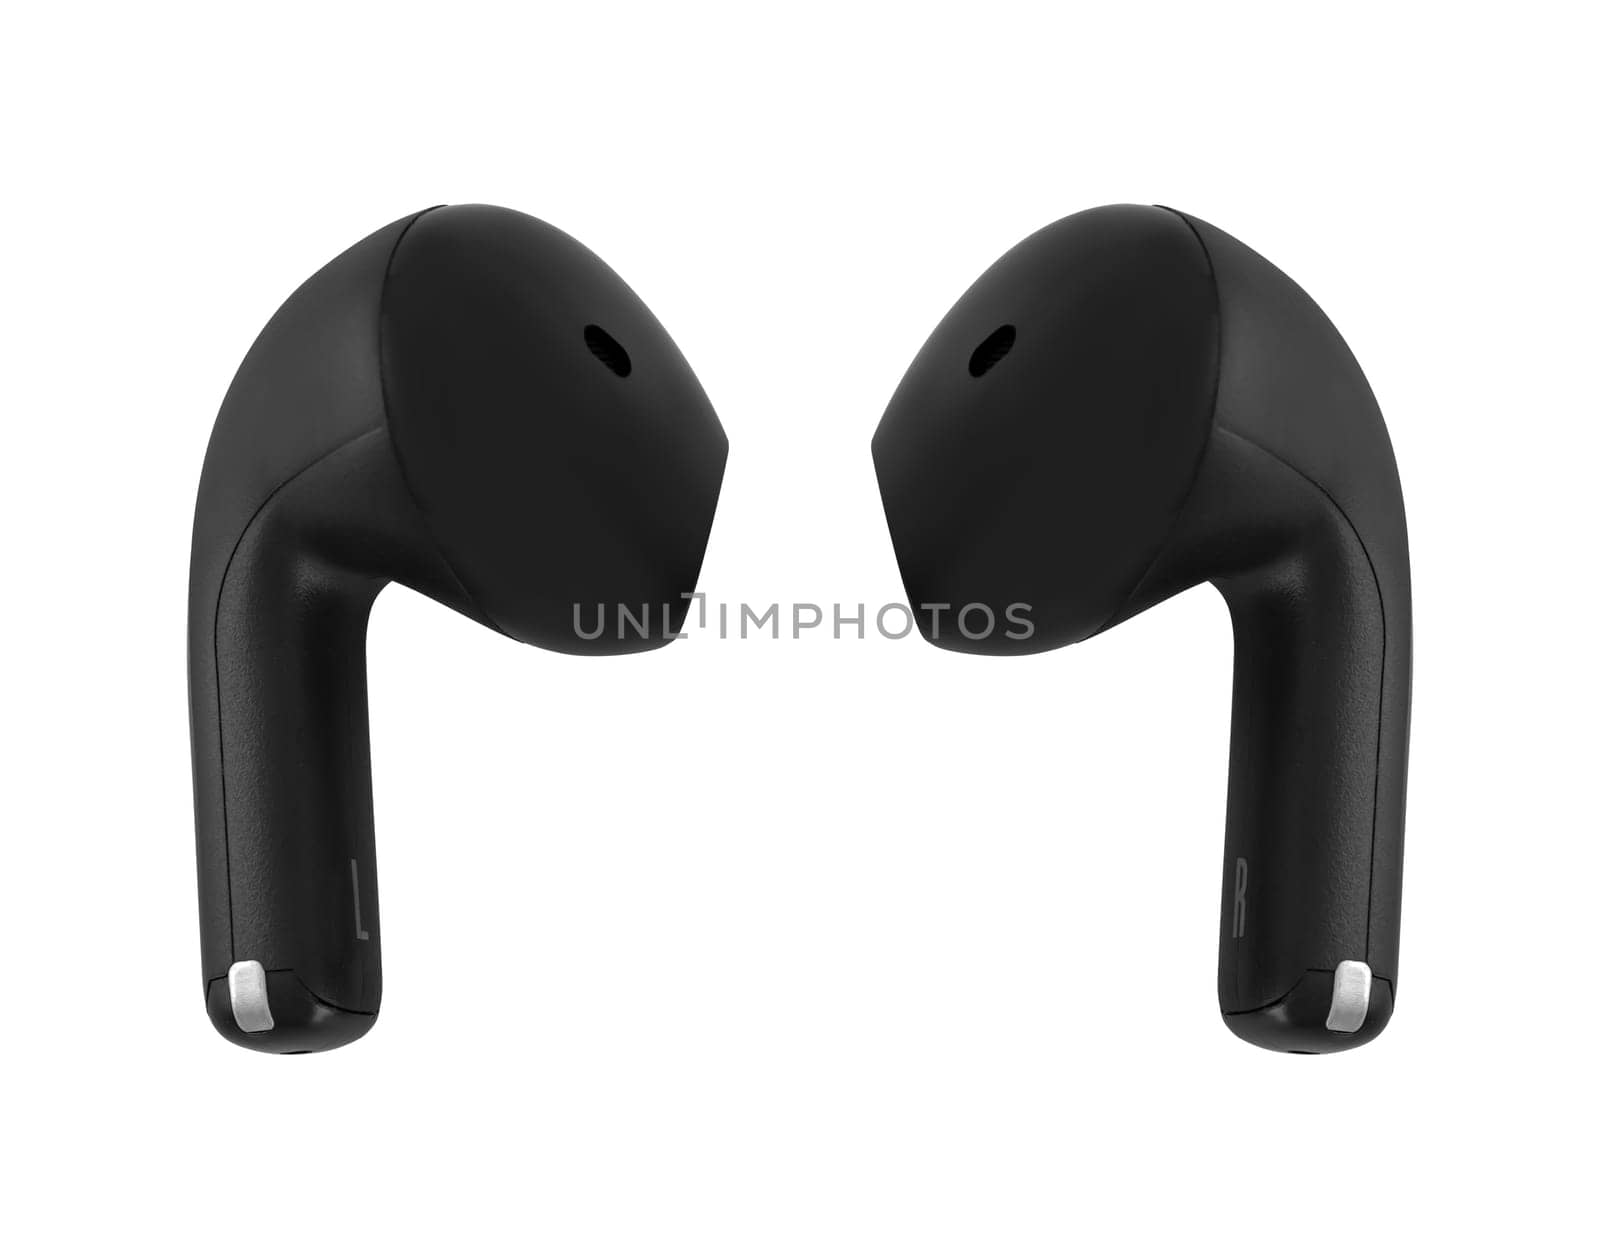 Wireless acoustic headphones, phone accessory, on white background in isolation